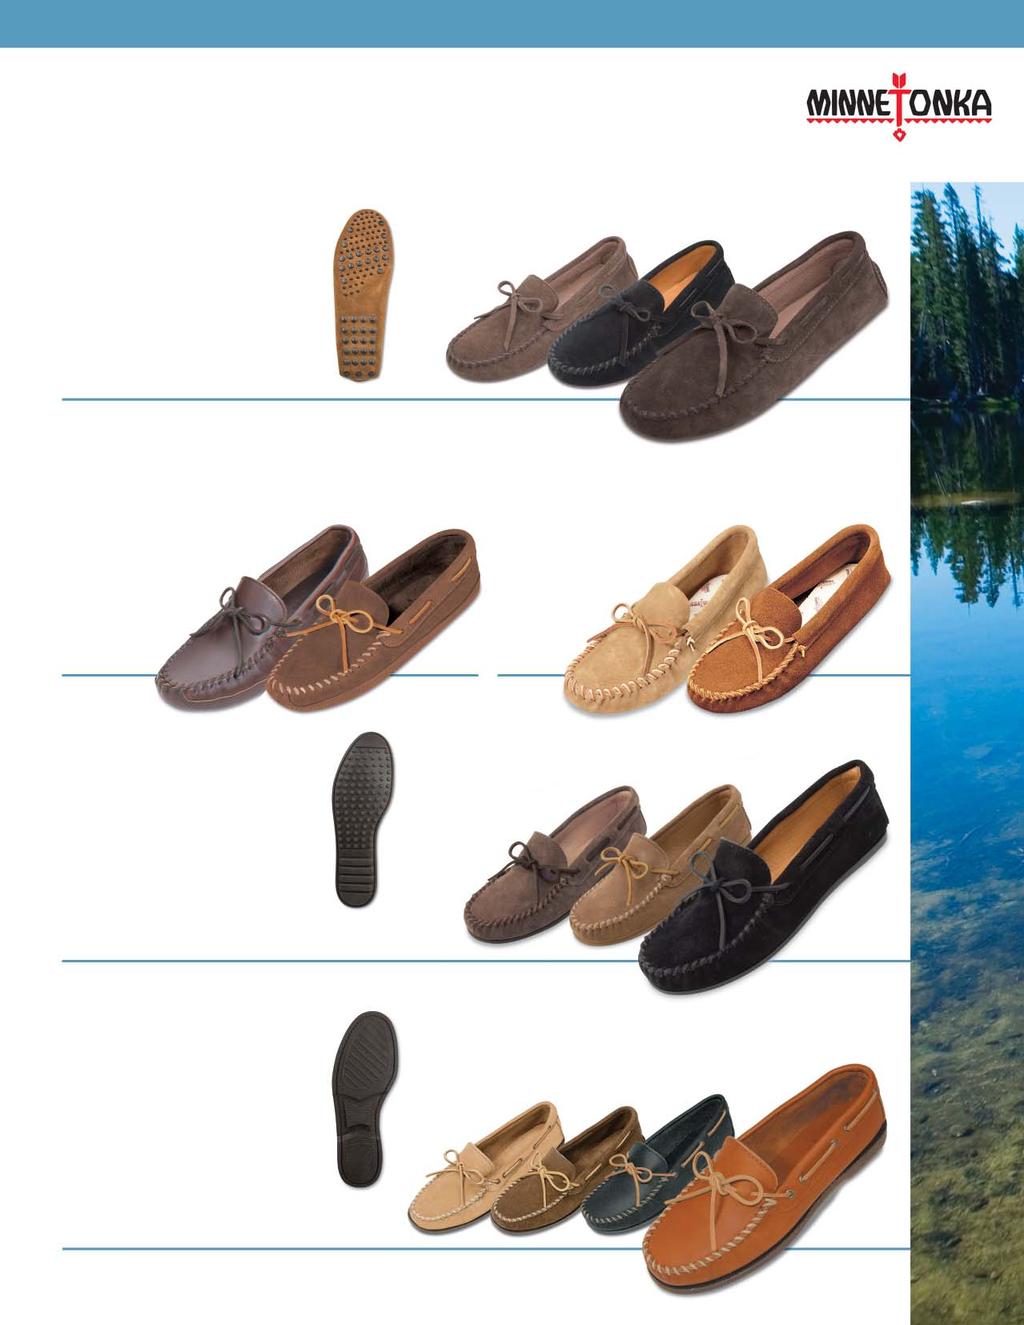 Men s Moccasins All Styles In Stock For Immediate Delivery. Driving Moc Soft suede with leather lining. Fully padded insole, long wearing nub bottom.